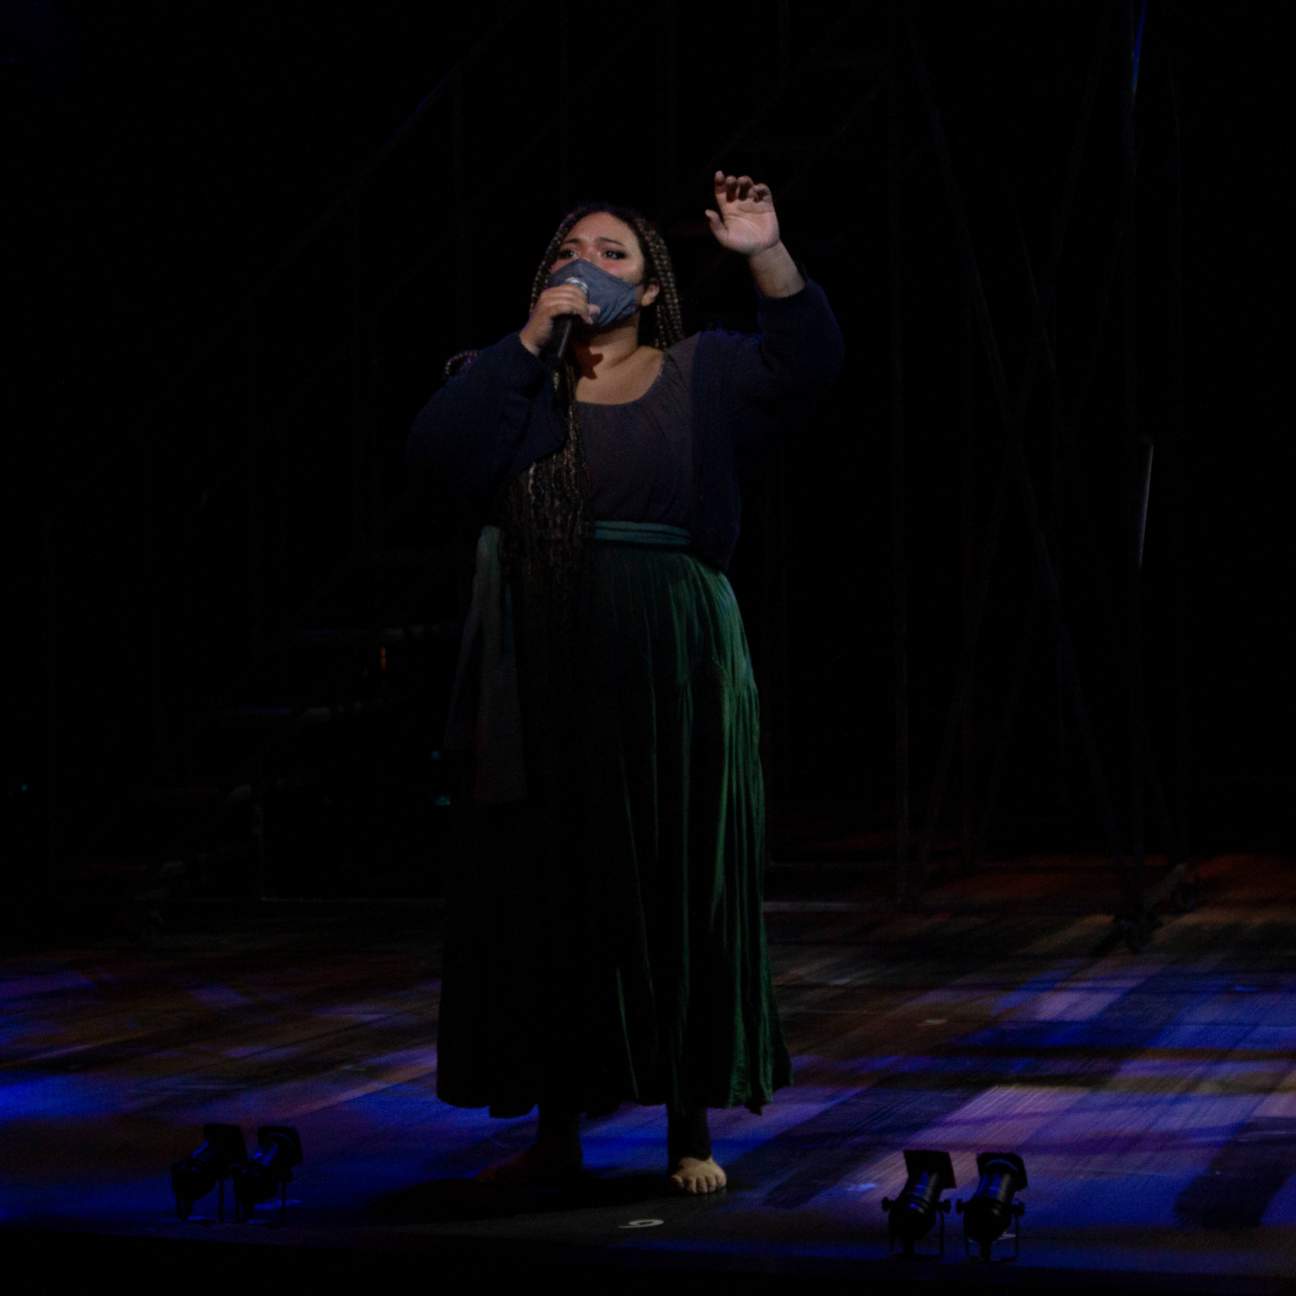 A young girl in a long loose skirt, peasant shirt and knit jacket stands barefoot singing into her microphone, her other arm is raised above her head and she looking longingly into the audience